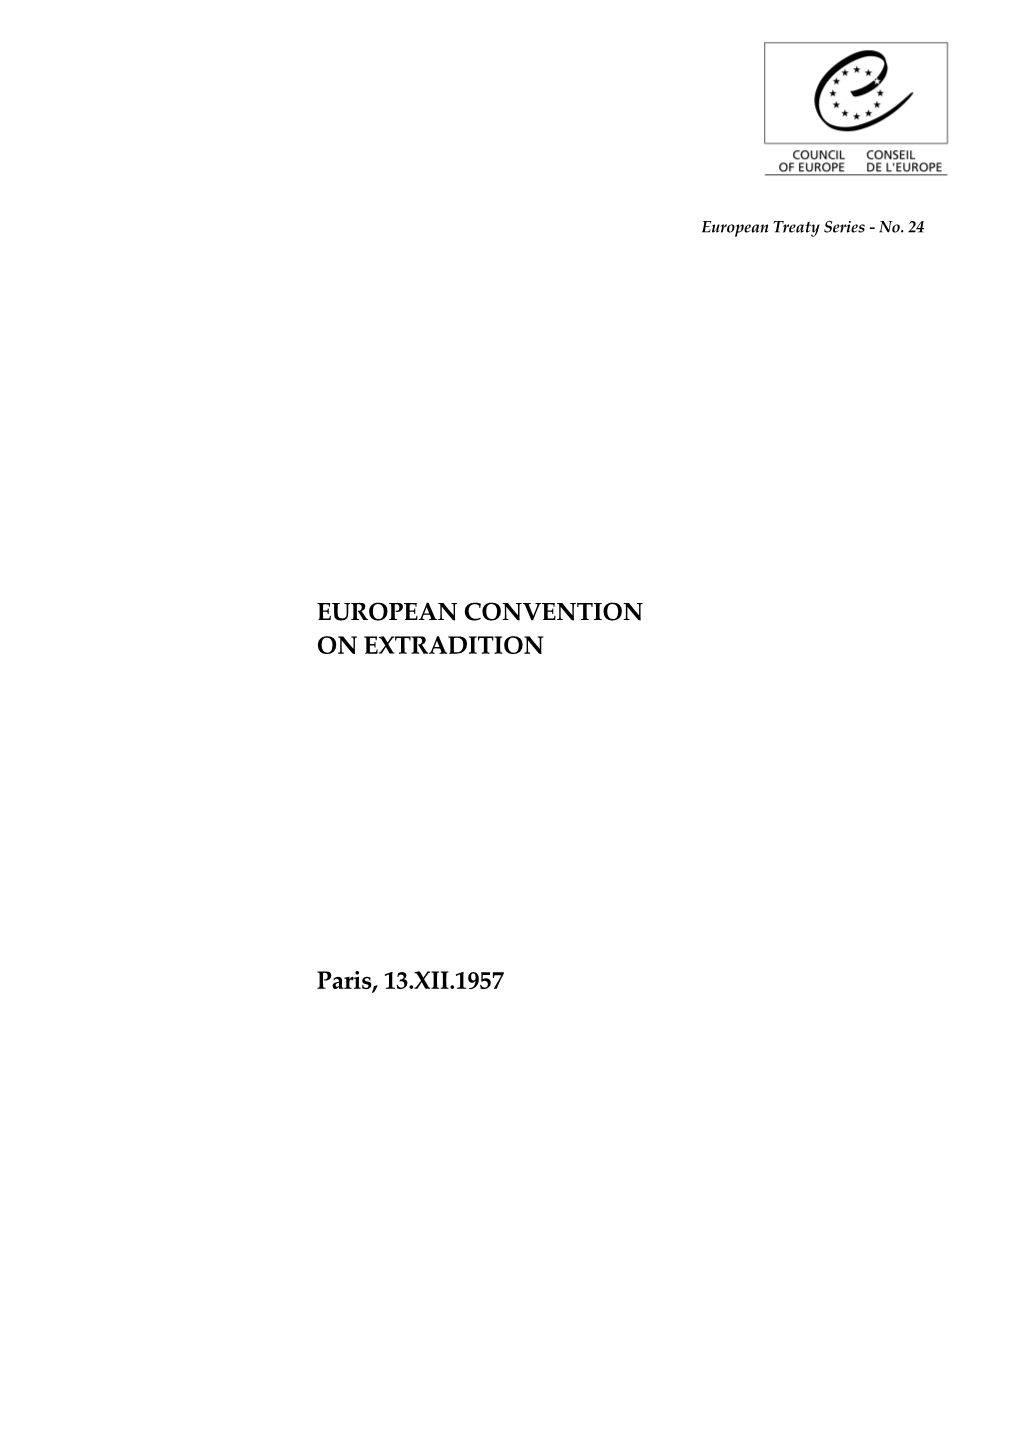 European Convention on Extradition (ETS No. 024)